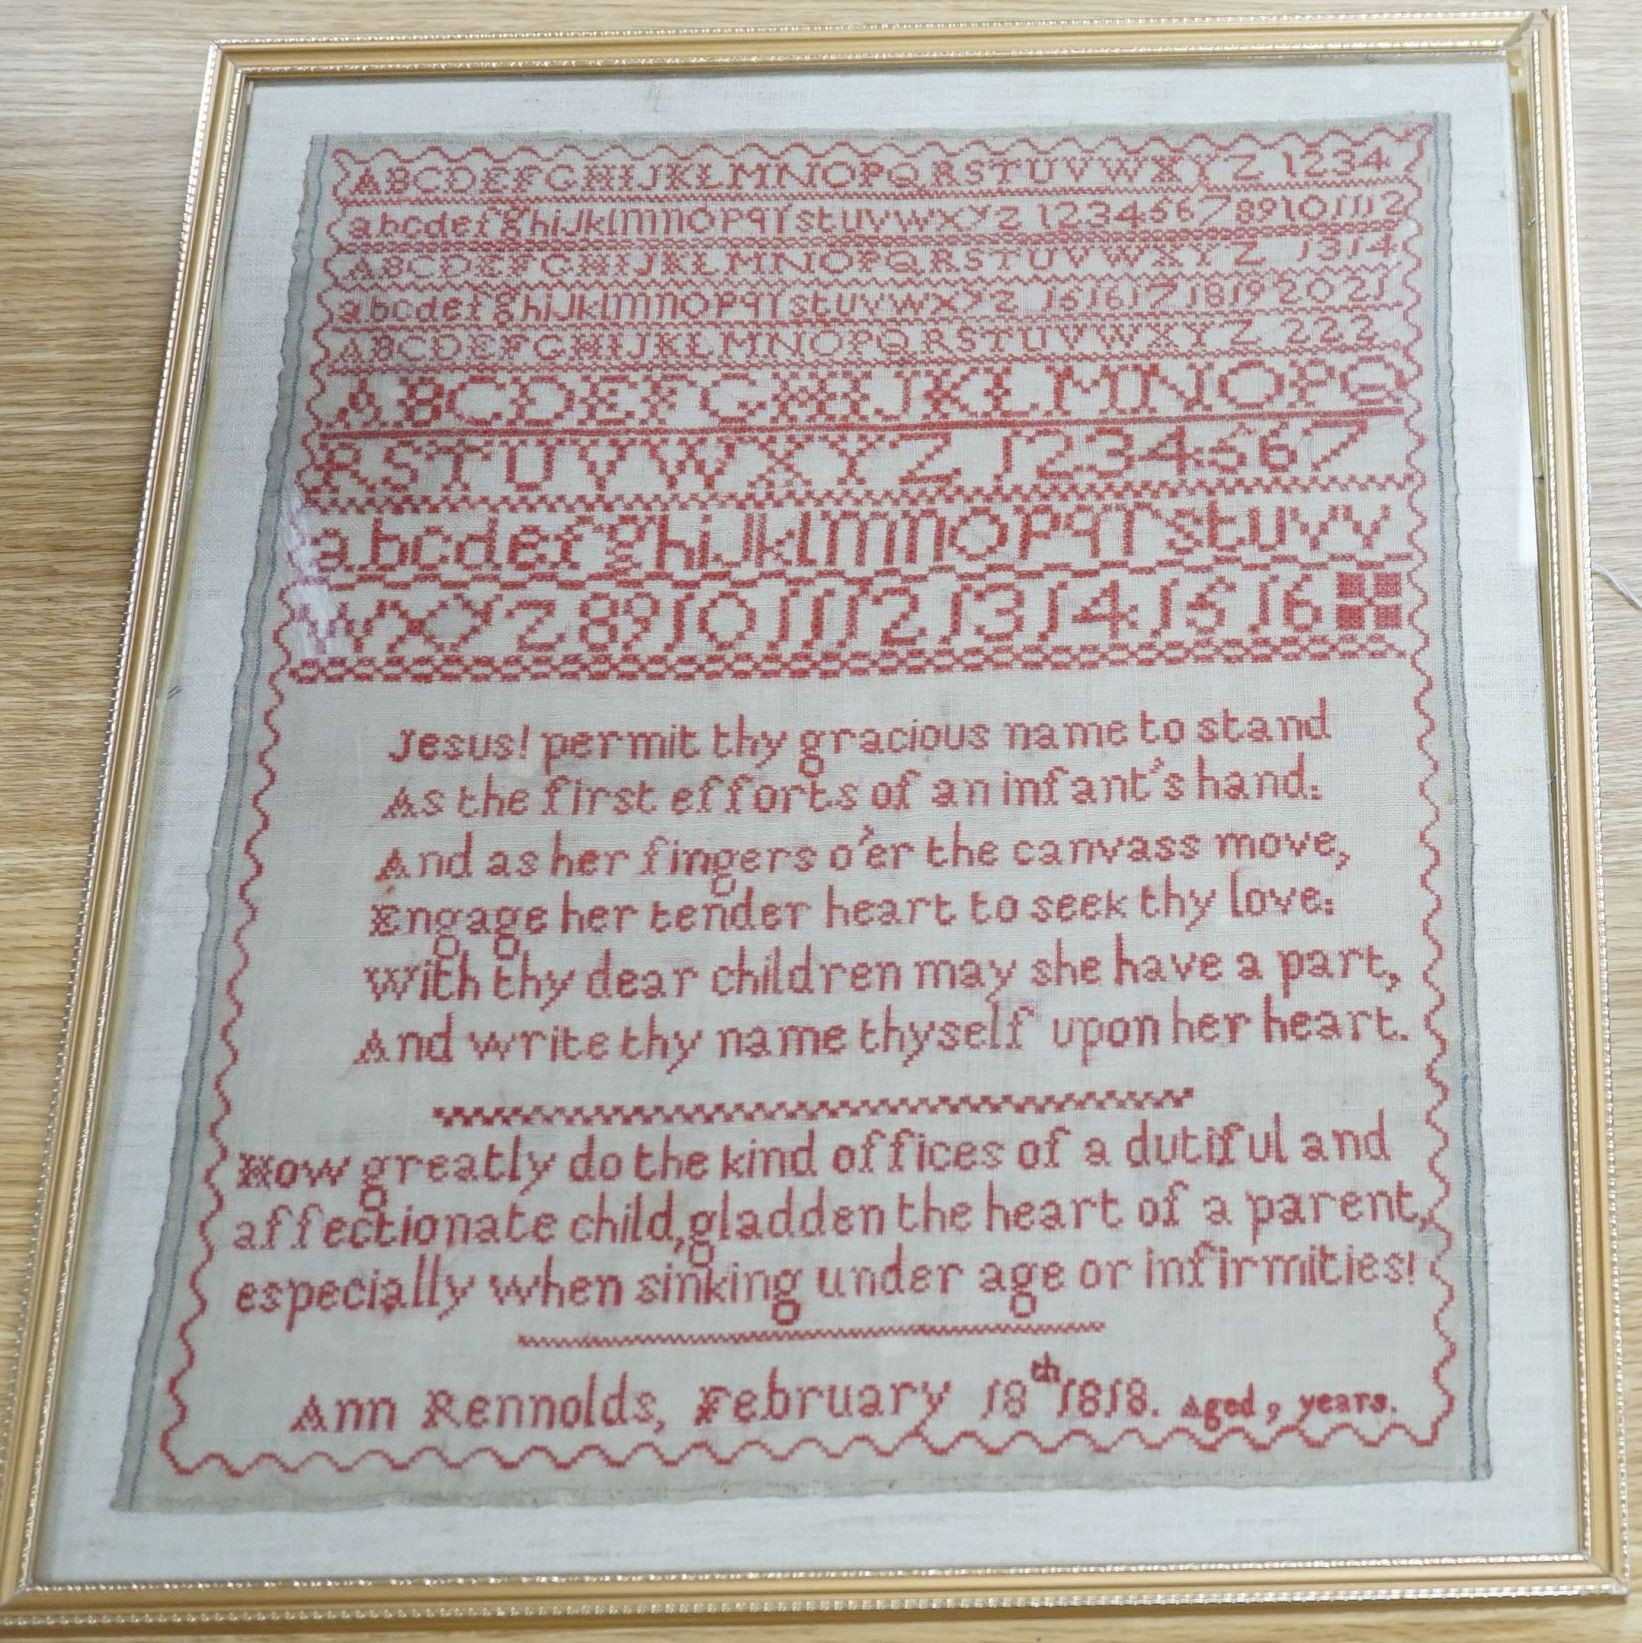 19th century red cross stitch sampler by Ann Reynolds, dated 1818, 34 cms wide x 42 cms high.